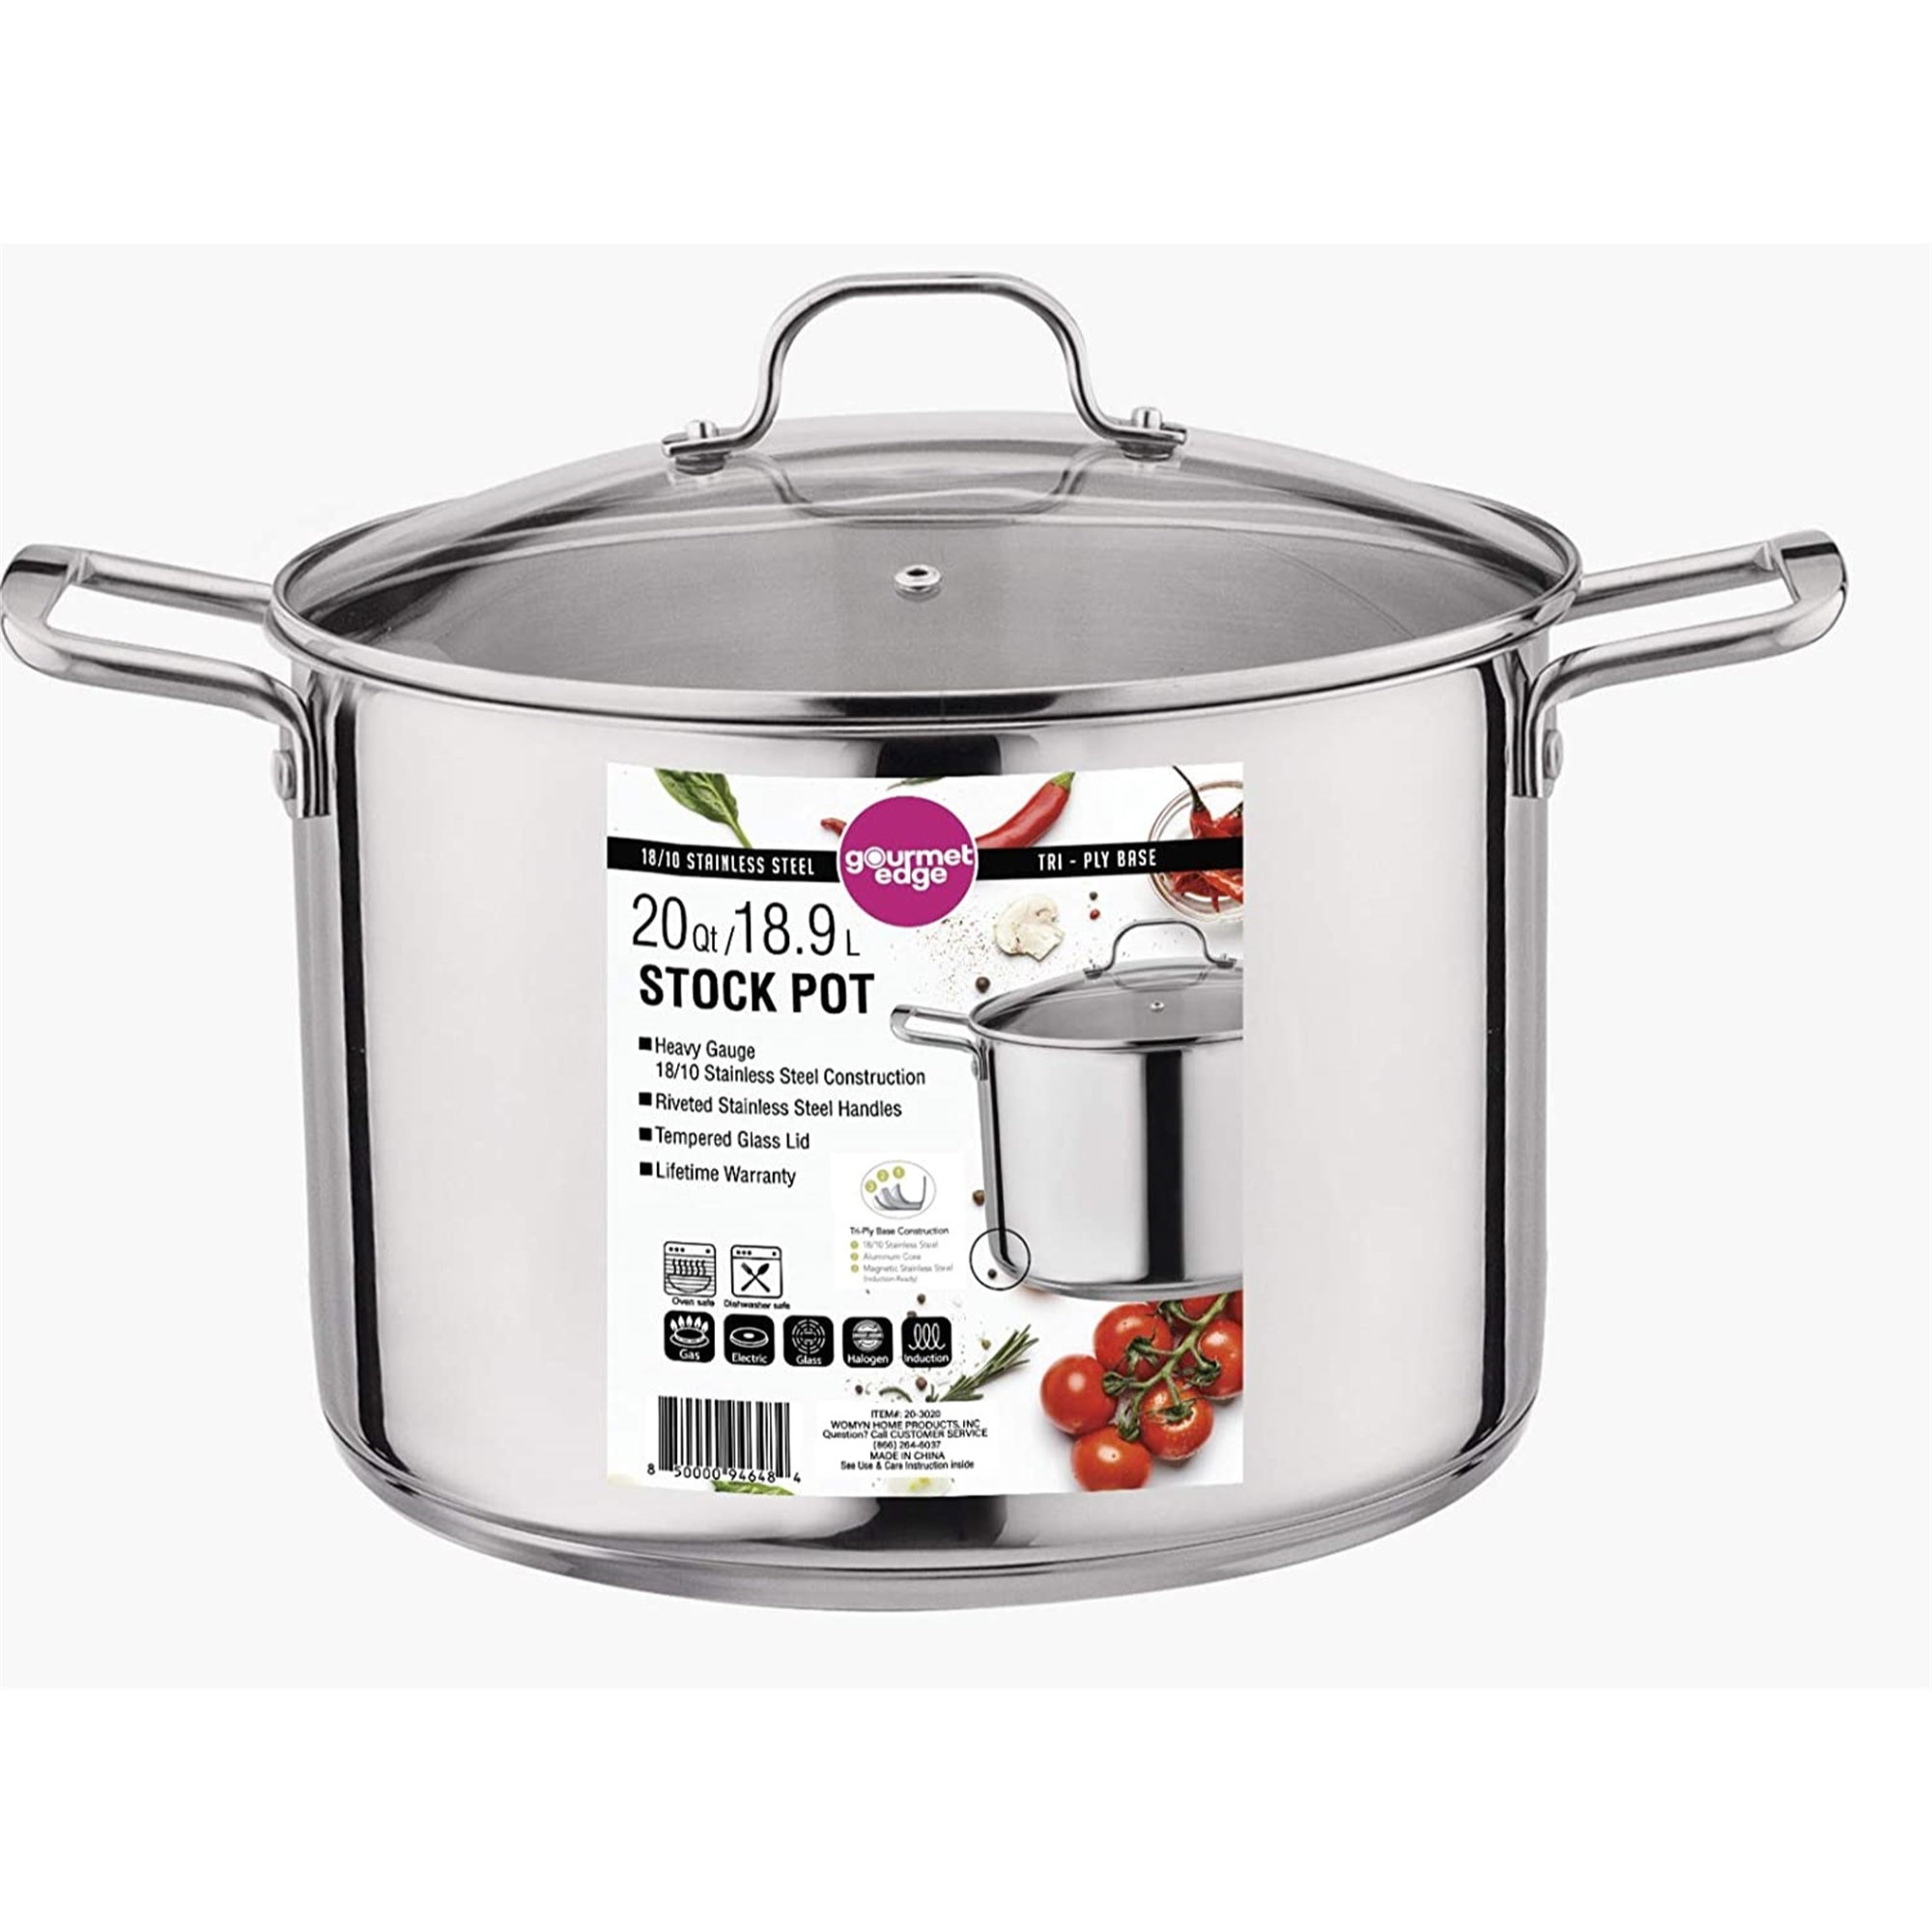 Winco Induction Ready Aluminum Stock Pots with Stainless Steel Bottom - 10  Quart